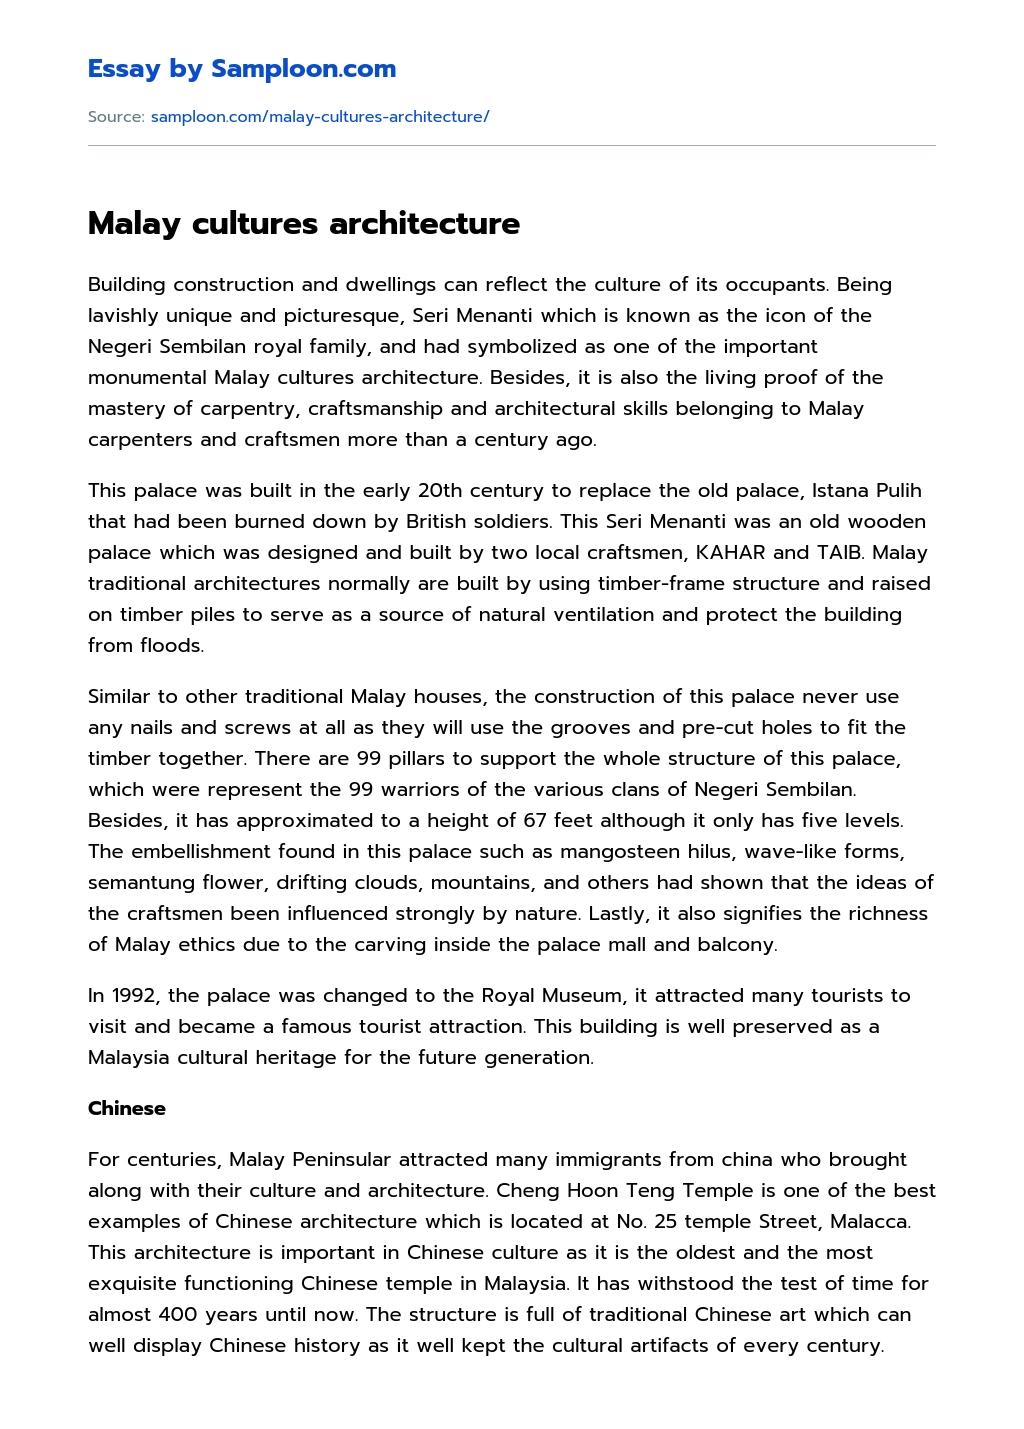 Malay cultures architecture essay